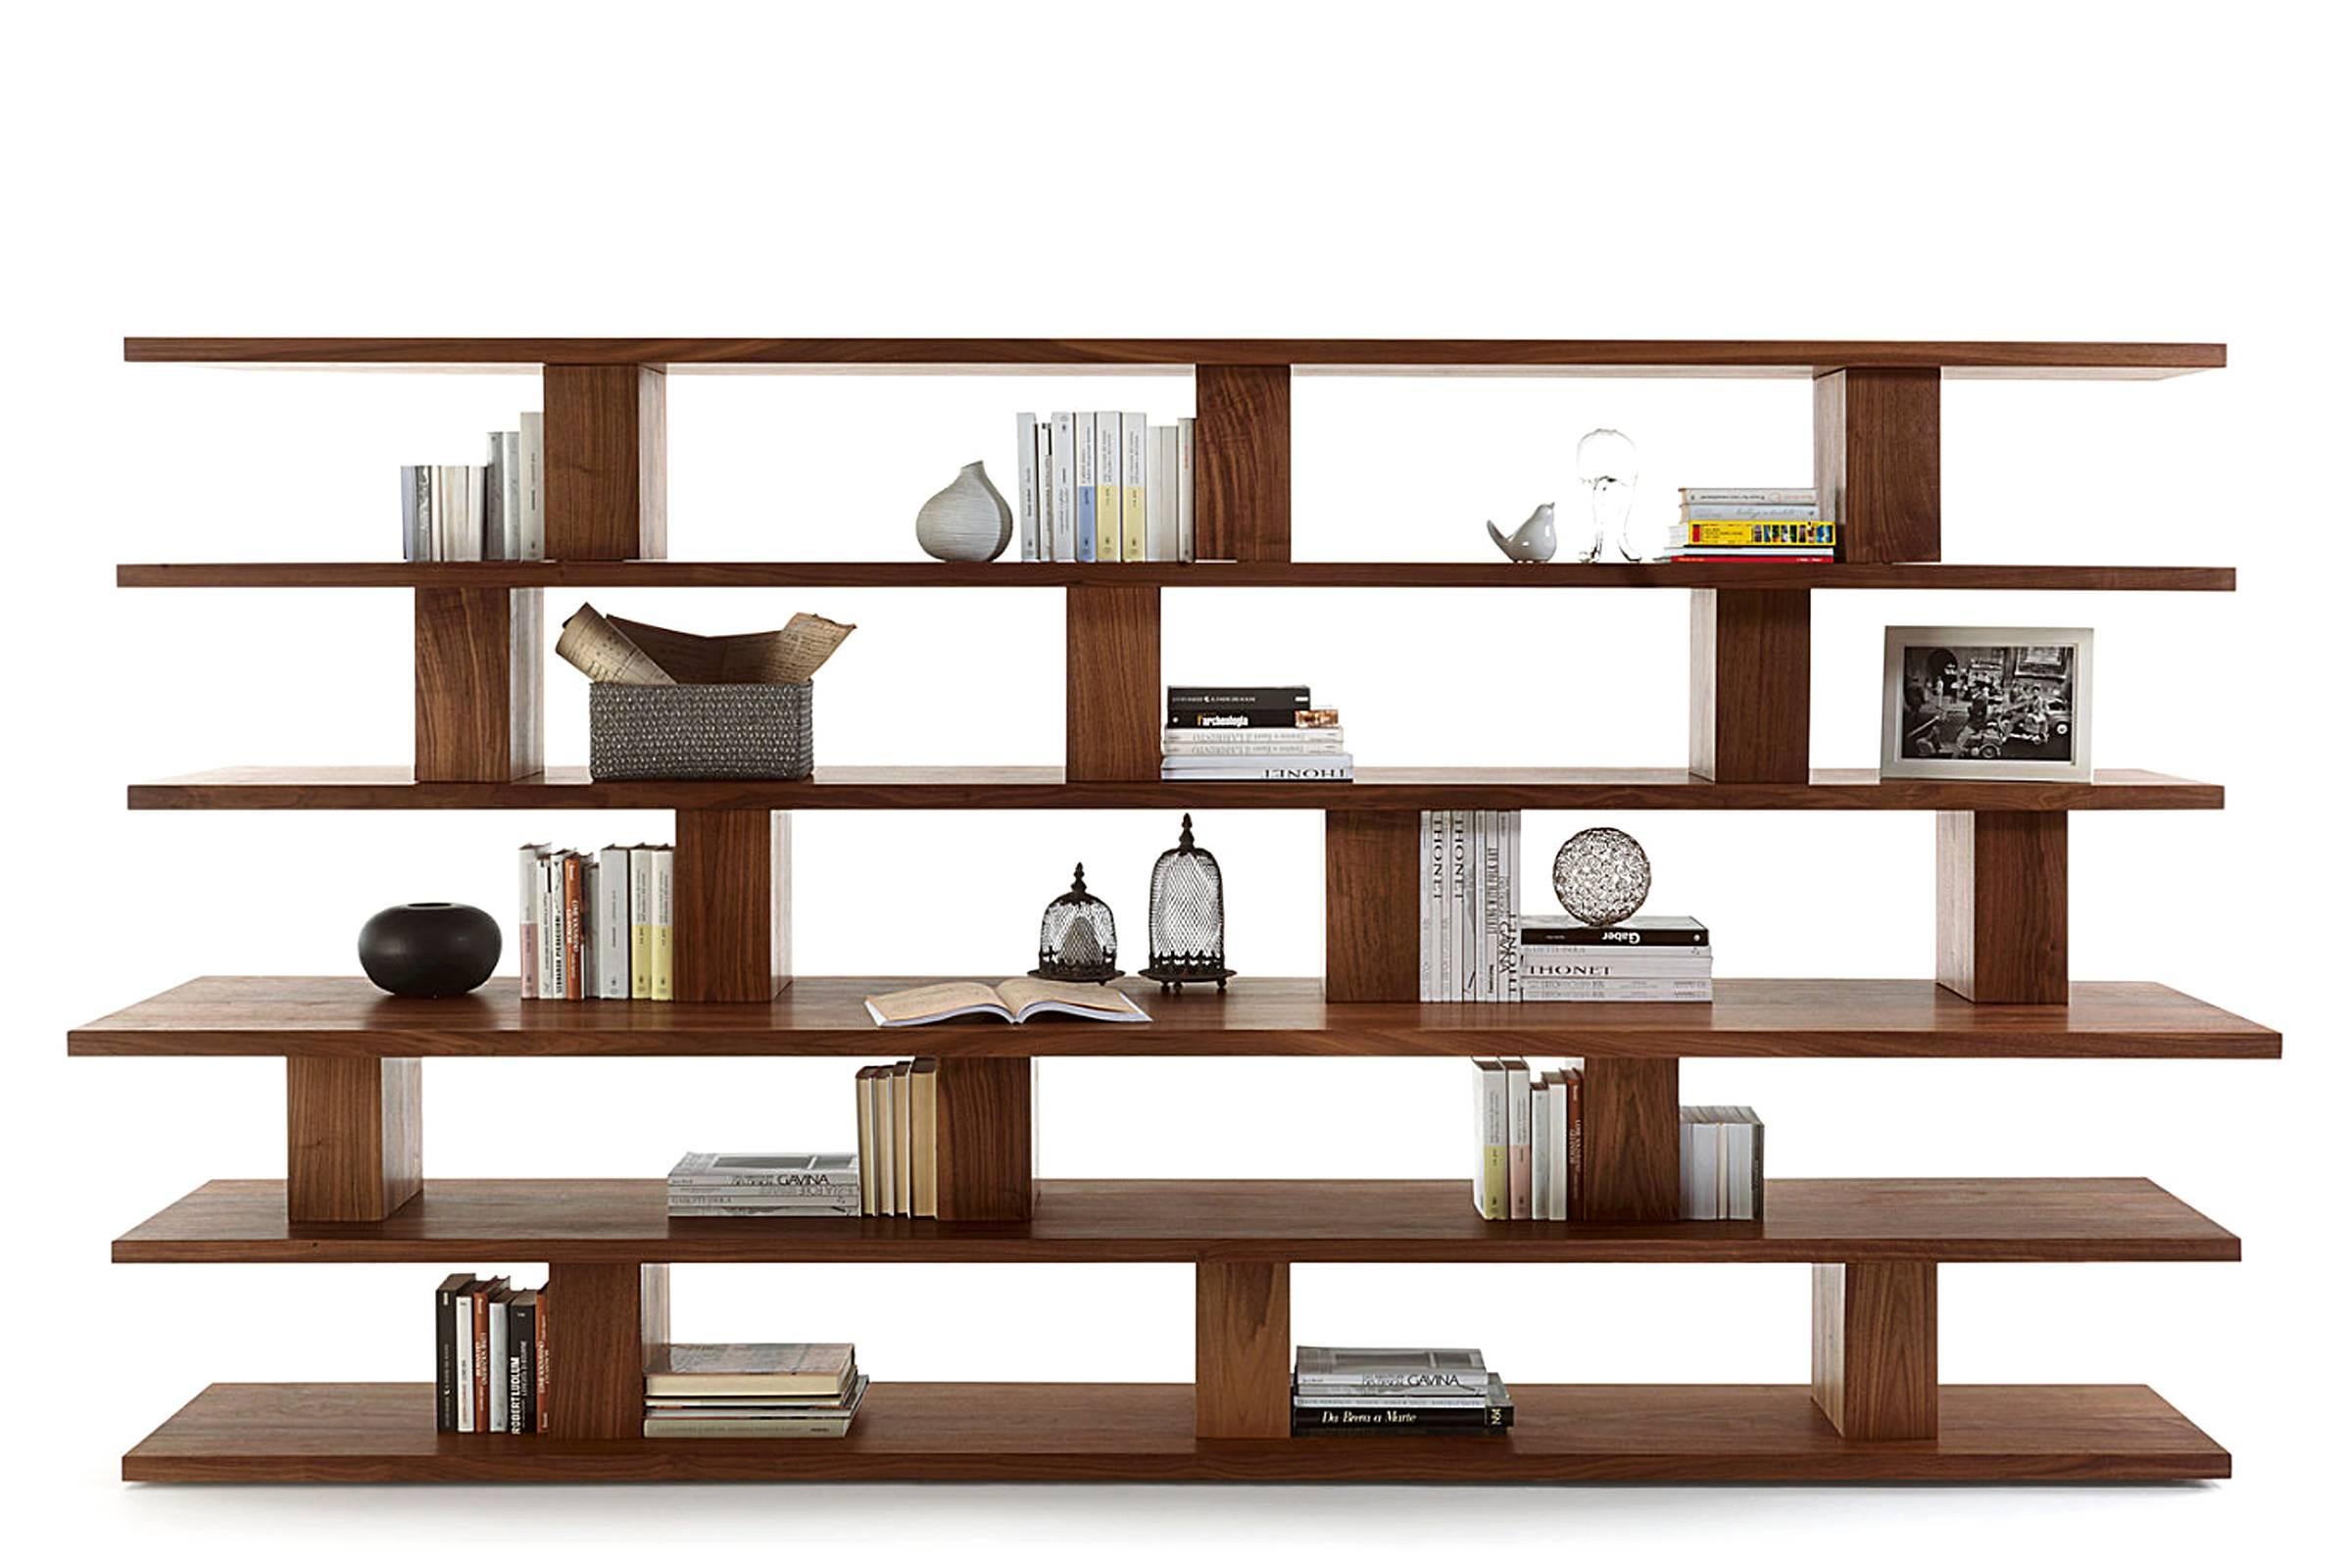 Bookshelf books all in solid walnut wood.
the third shelf from the bottom is wider.
Also available with all shelves at the same size,
on request.
L 320 x D 80 x H 175,5 cm, price: 19900,00€.
Available in L 280 x D 80 x H 175,5 cm, price: